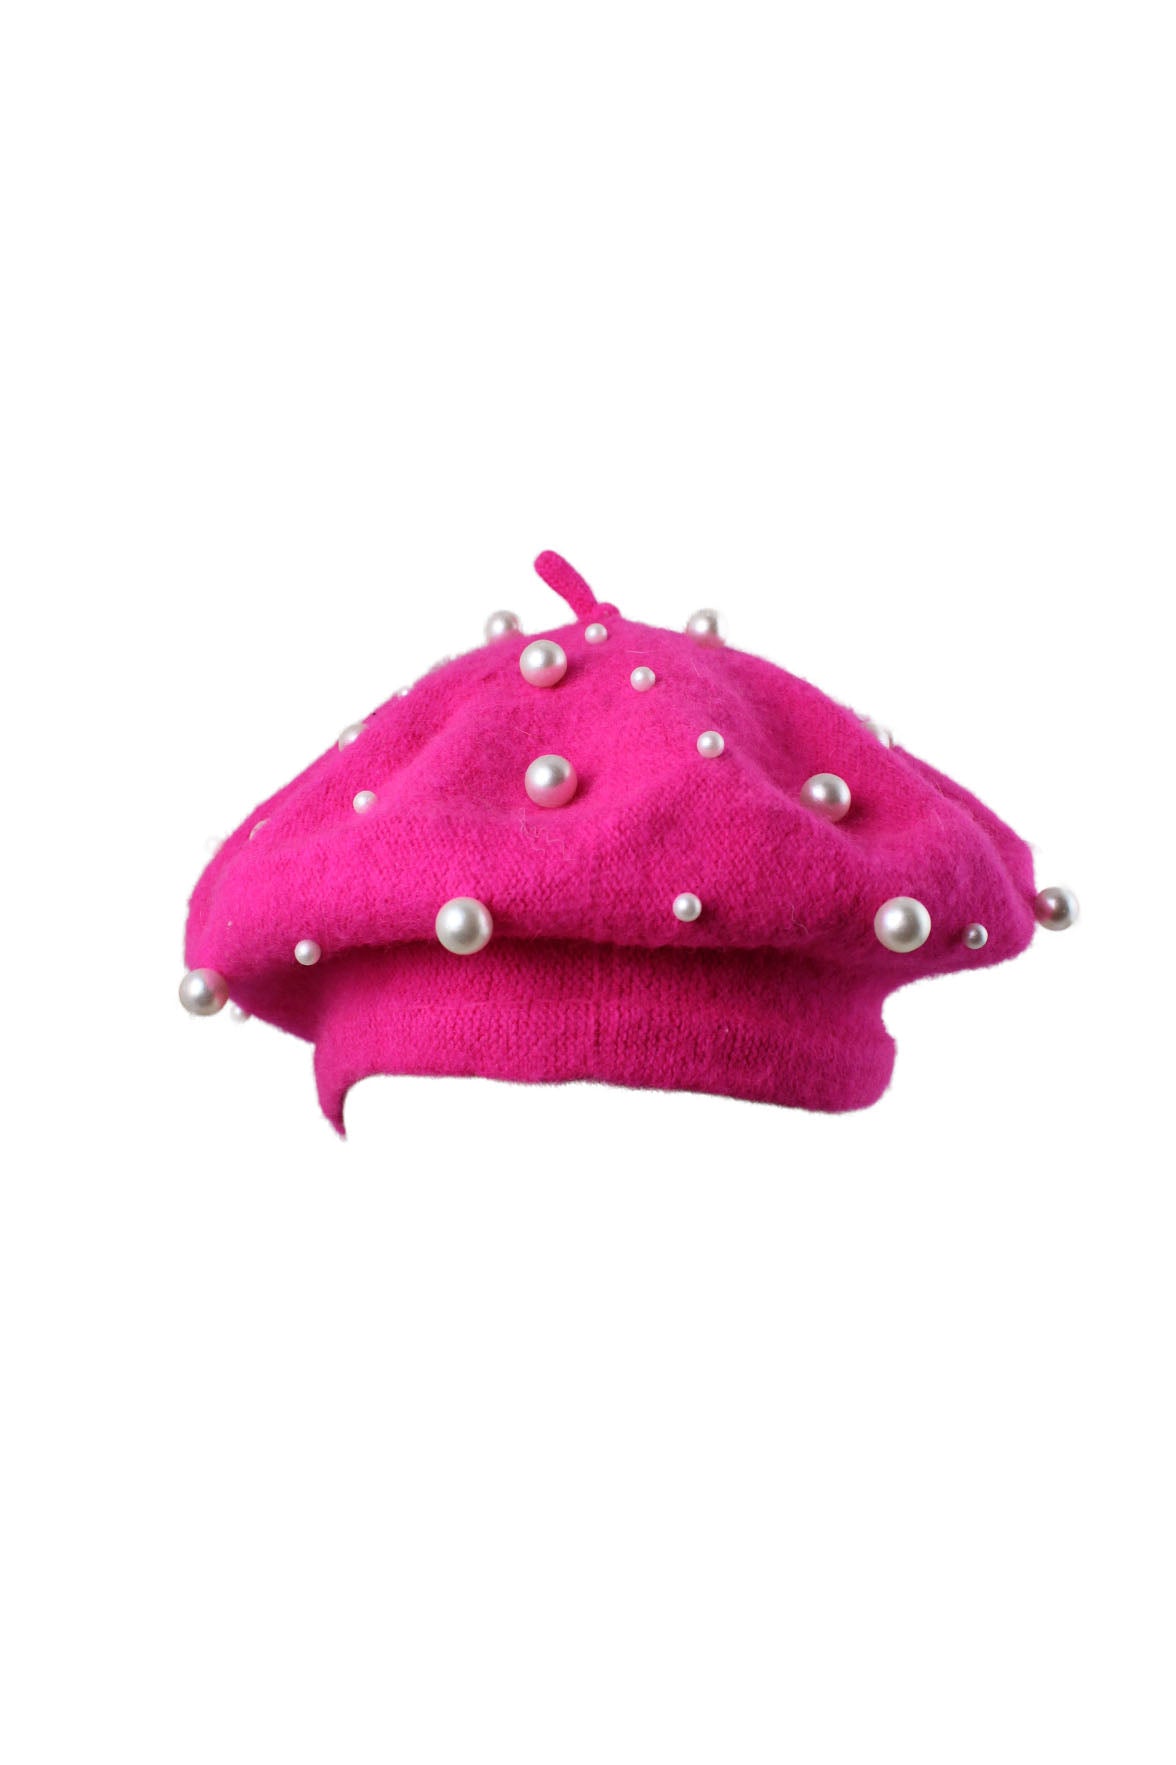 unlabeled hot pink knit beret. features 2 different pearl sizes spread across